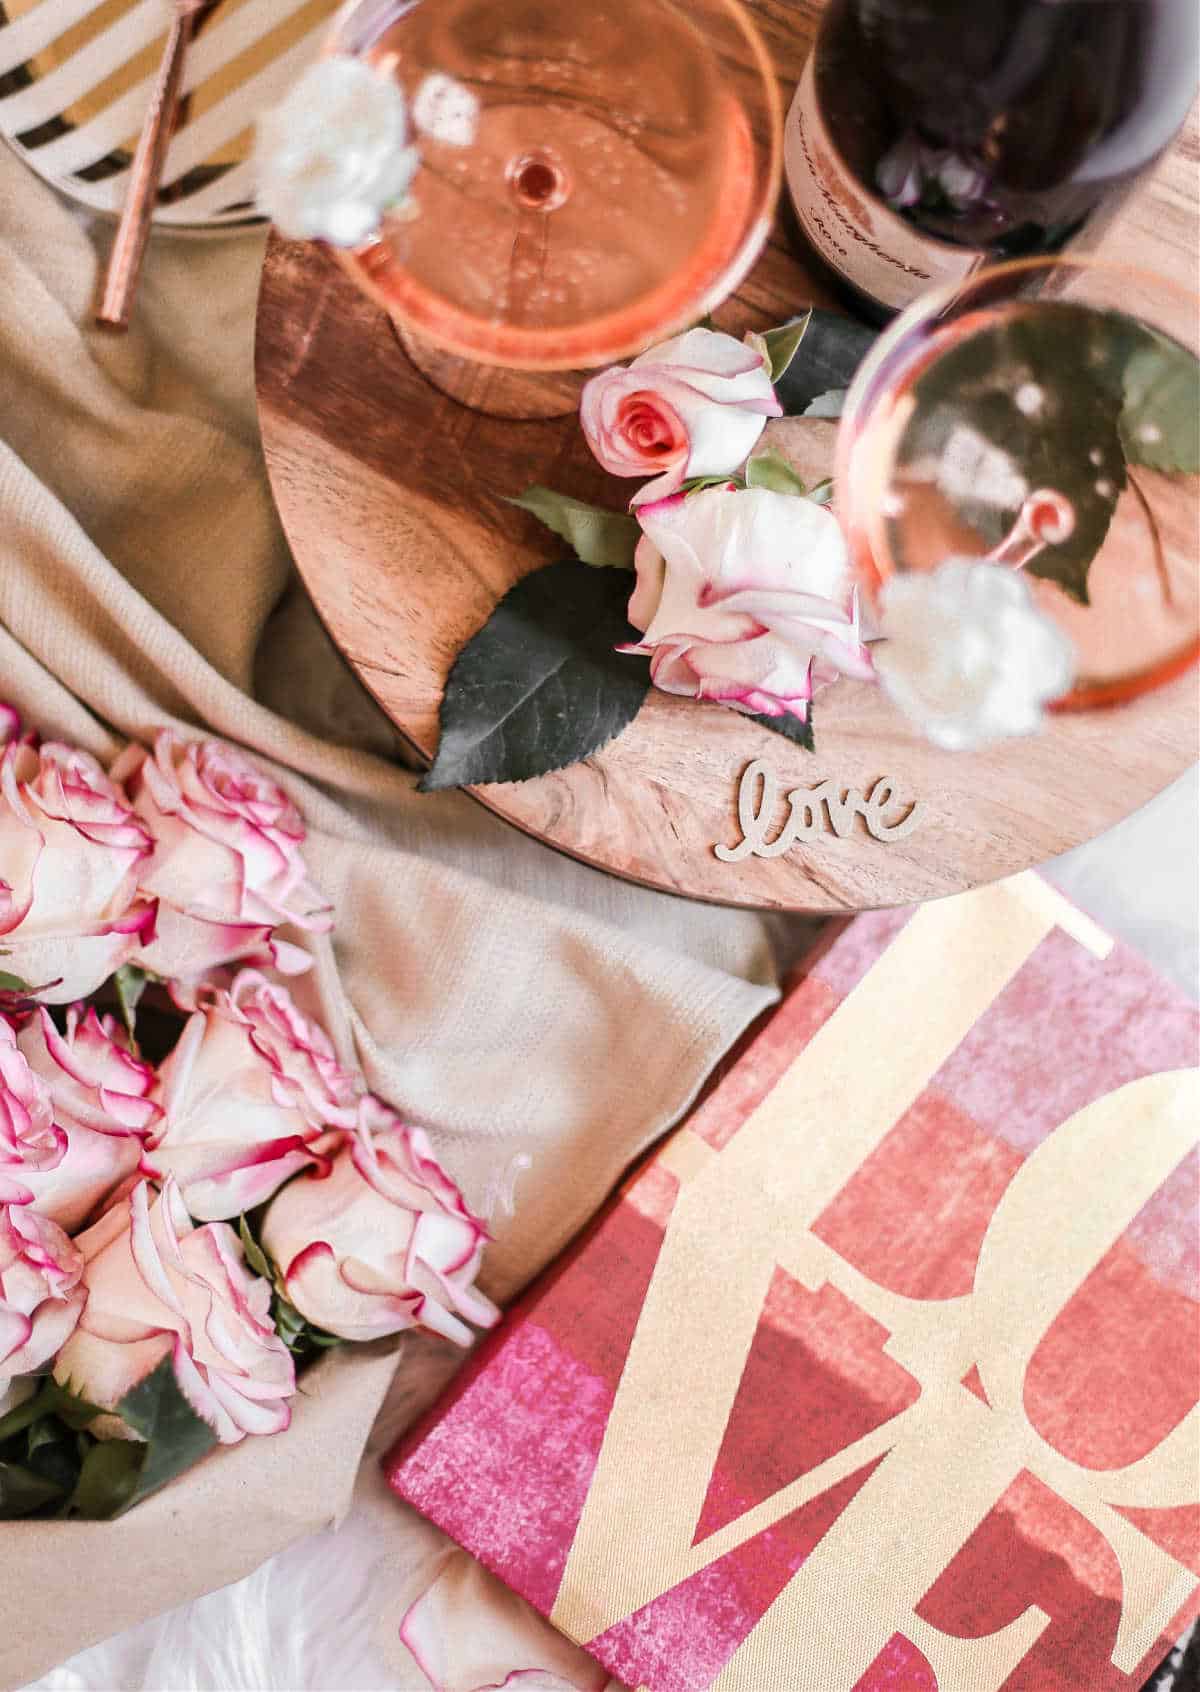 35 At-Home Valentine’s Day Ideas for Couples